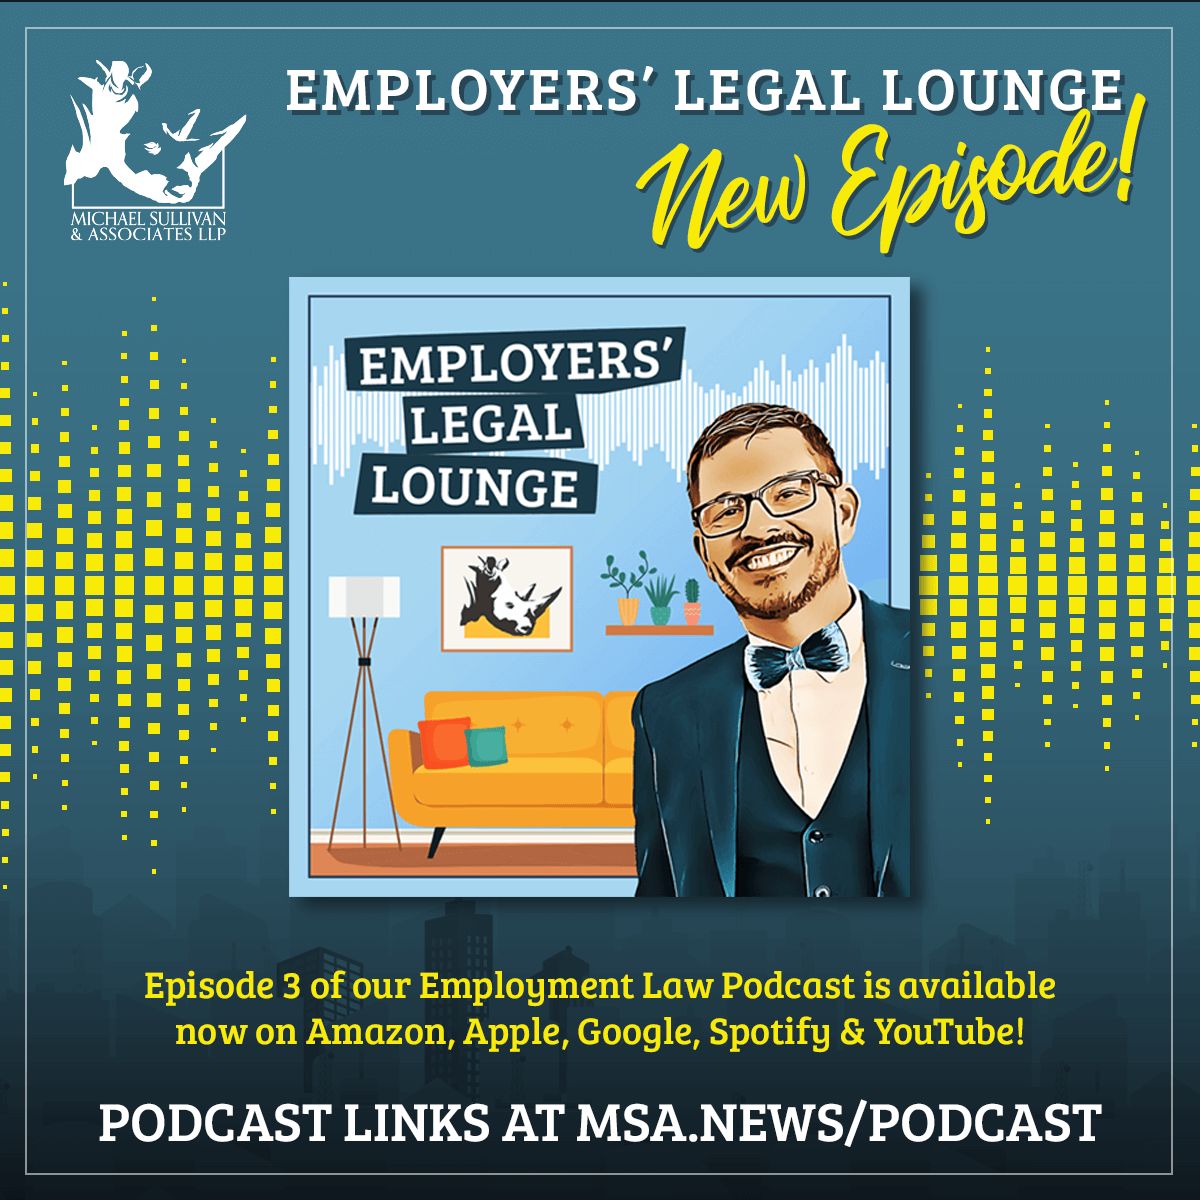 Employers' Legal Lounge podcast